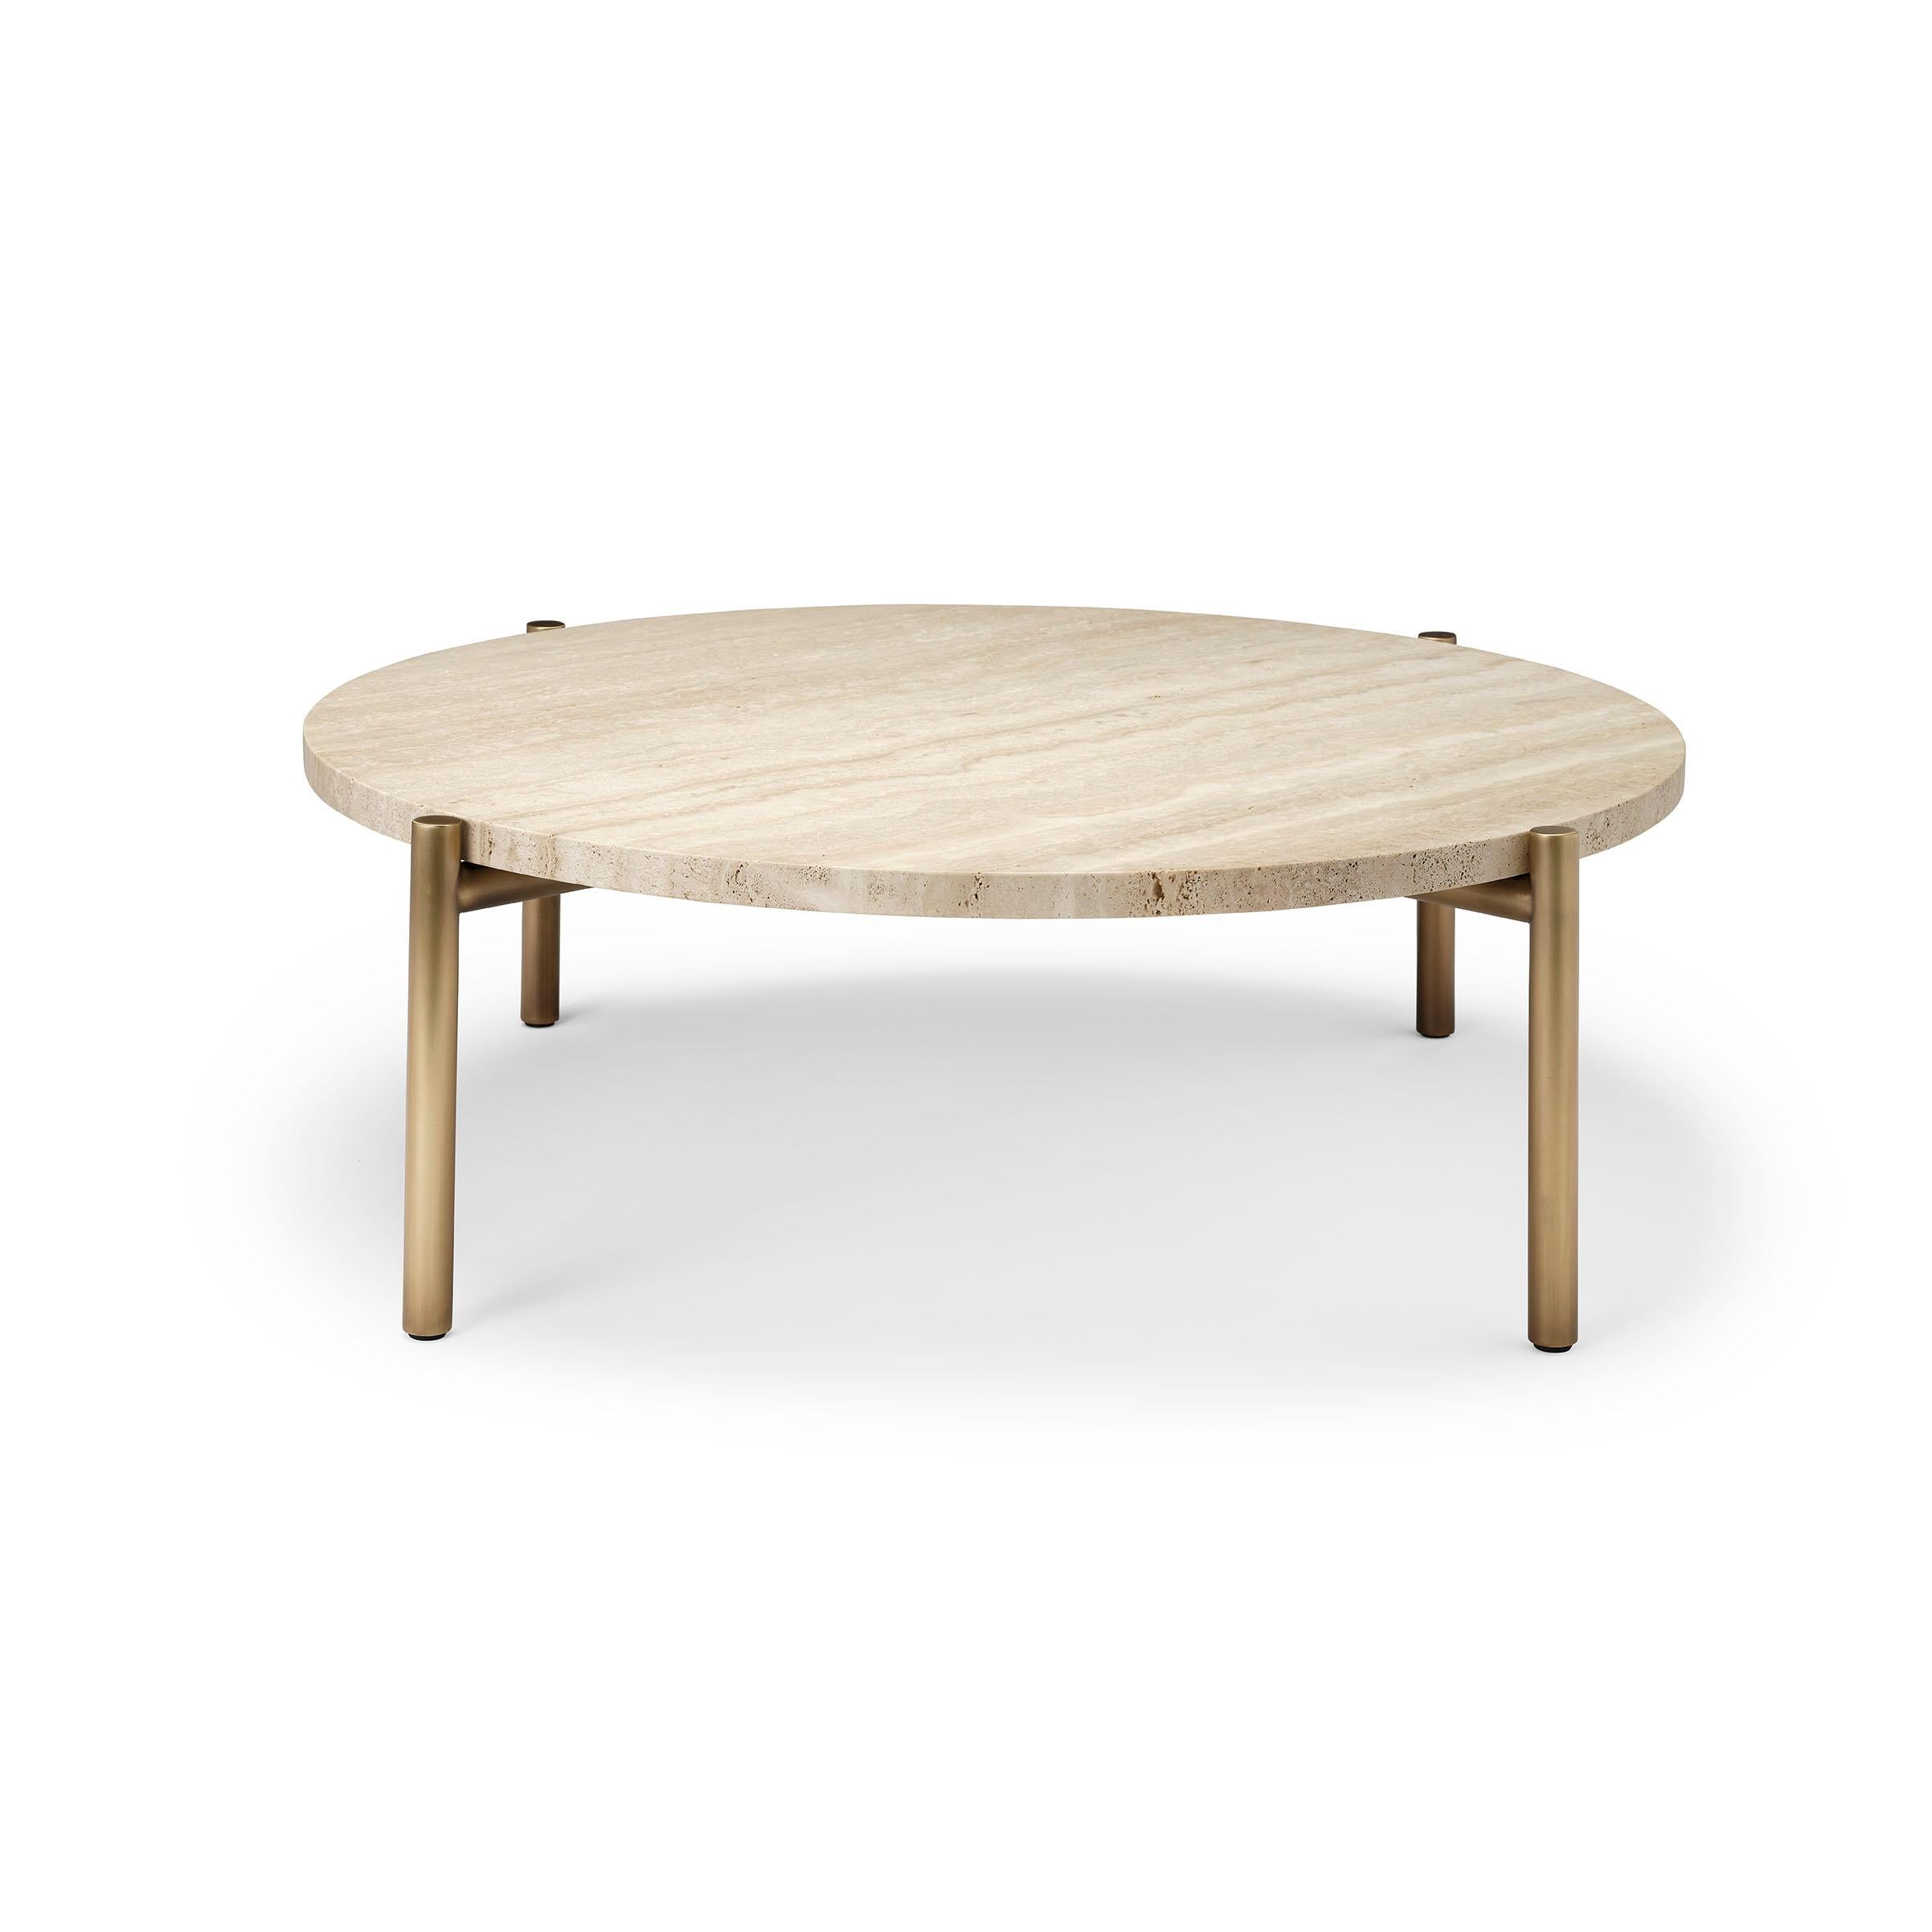 Ten10 Tivoli coffee table with 4 legs and a round travertine top. The base is stainless steel tube plated in burnished brass. Other finishes are available - oil rubbed bronze or polished or brushed stainless steel. The top is 3cm thick vein cut